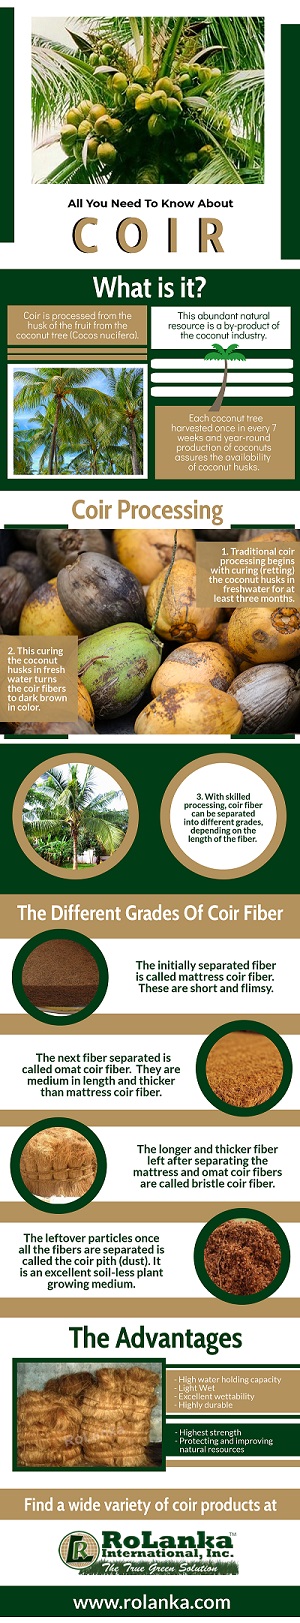 Image showing Infographic on Information about COIR